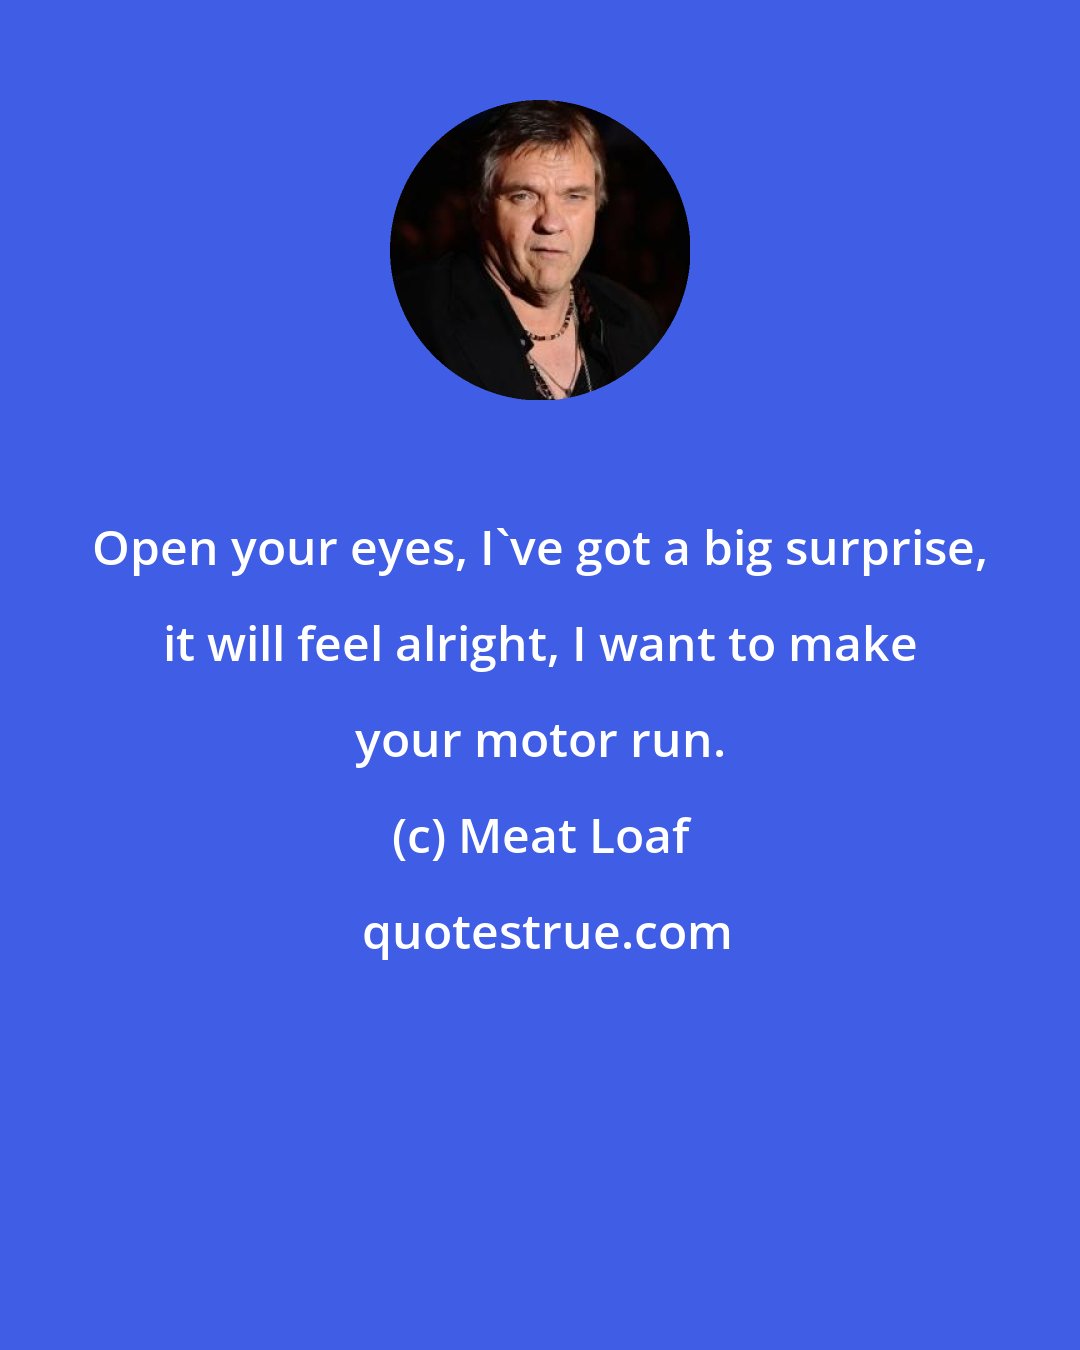 Meat Loaf: Open your eyes, I've got a big surprise, it will feel alright, I want to make your motor run.